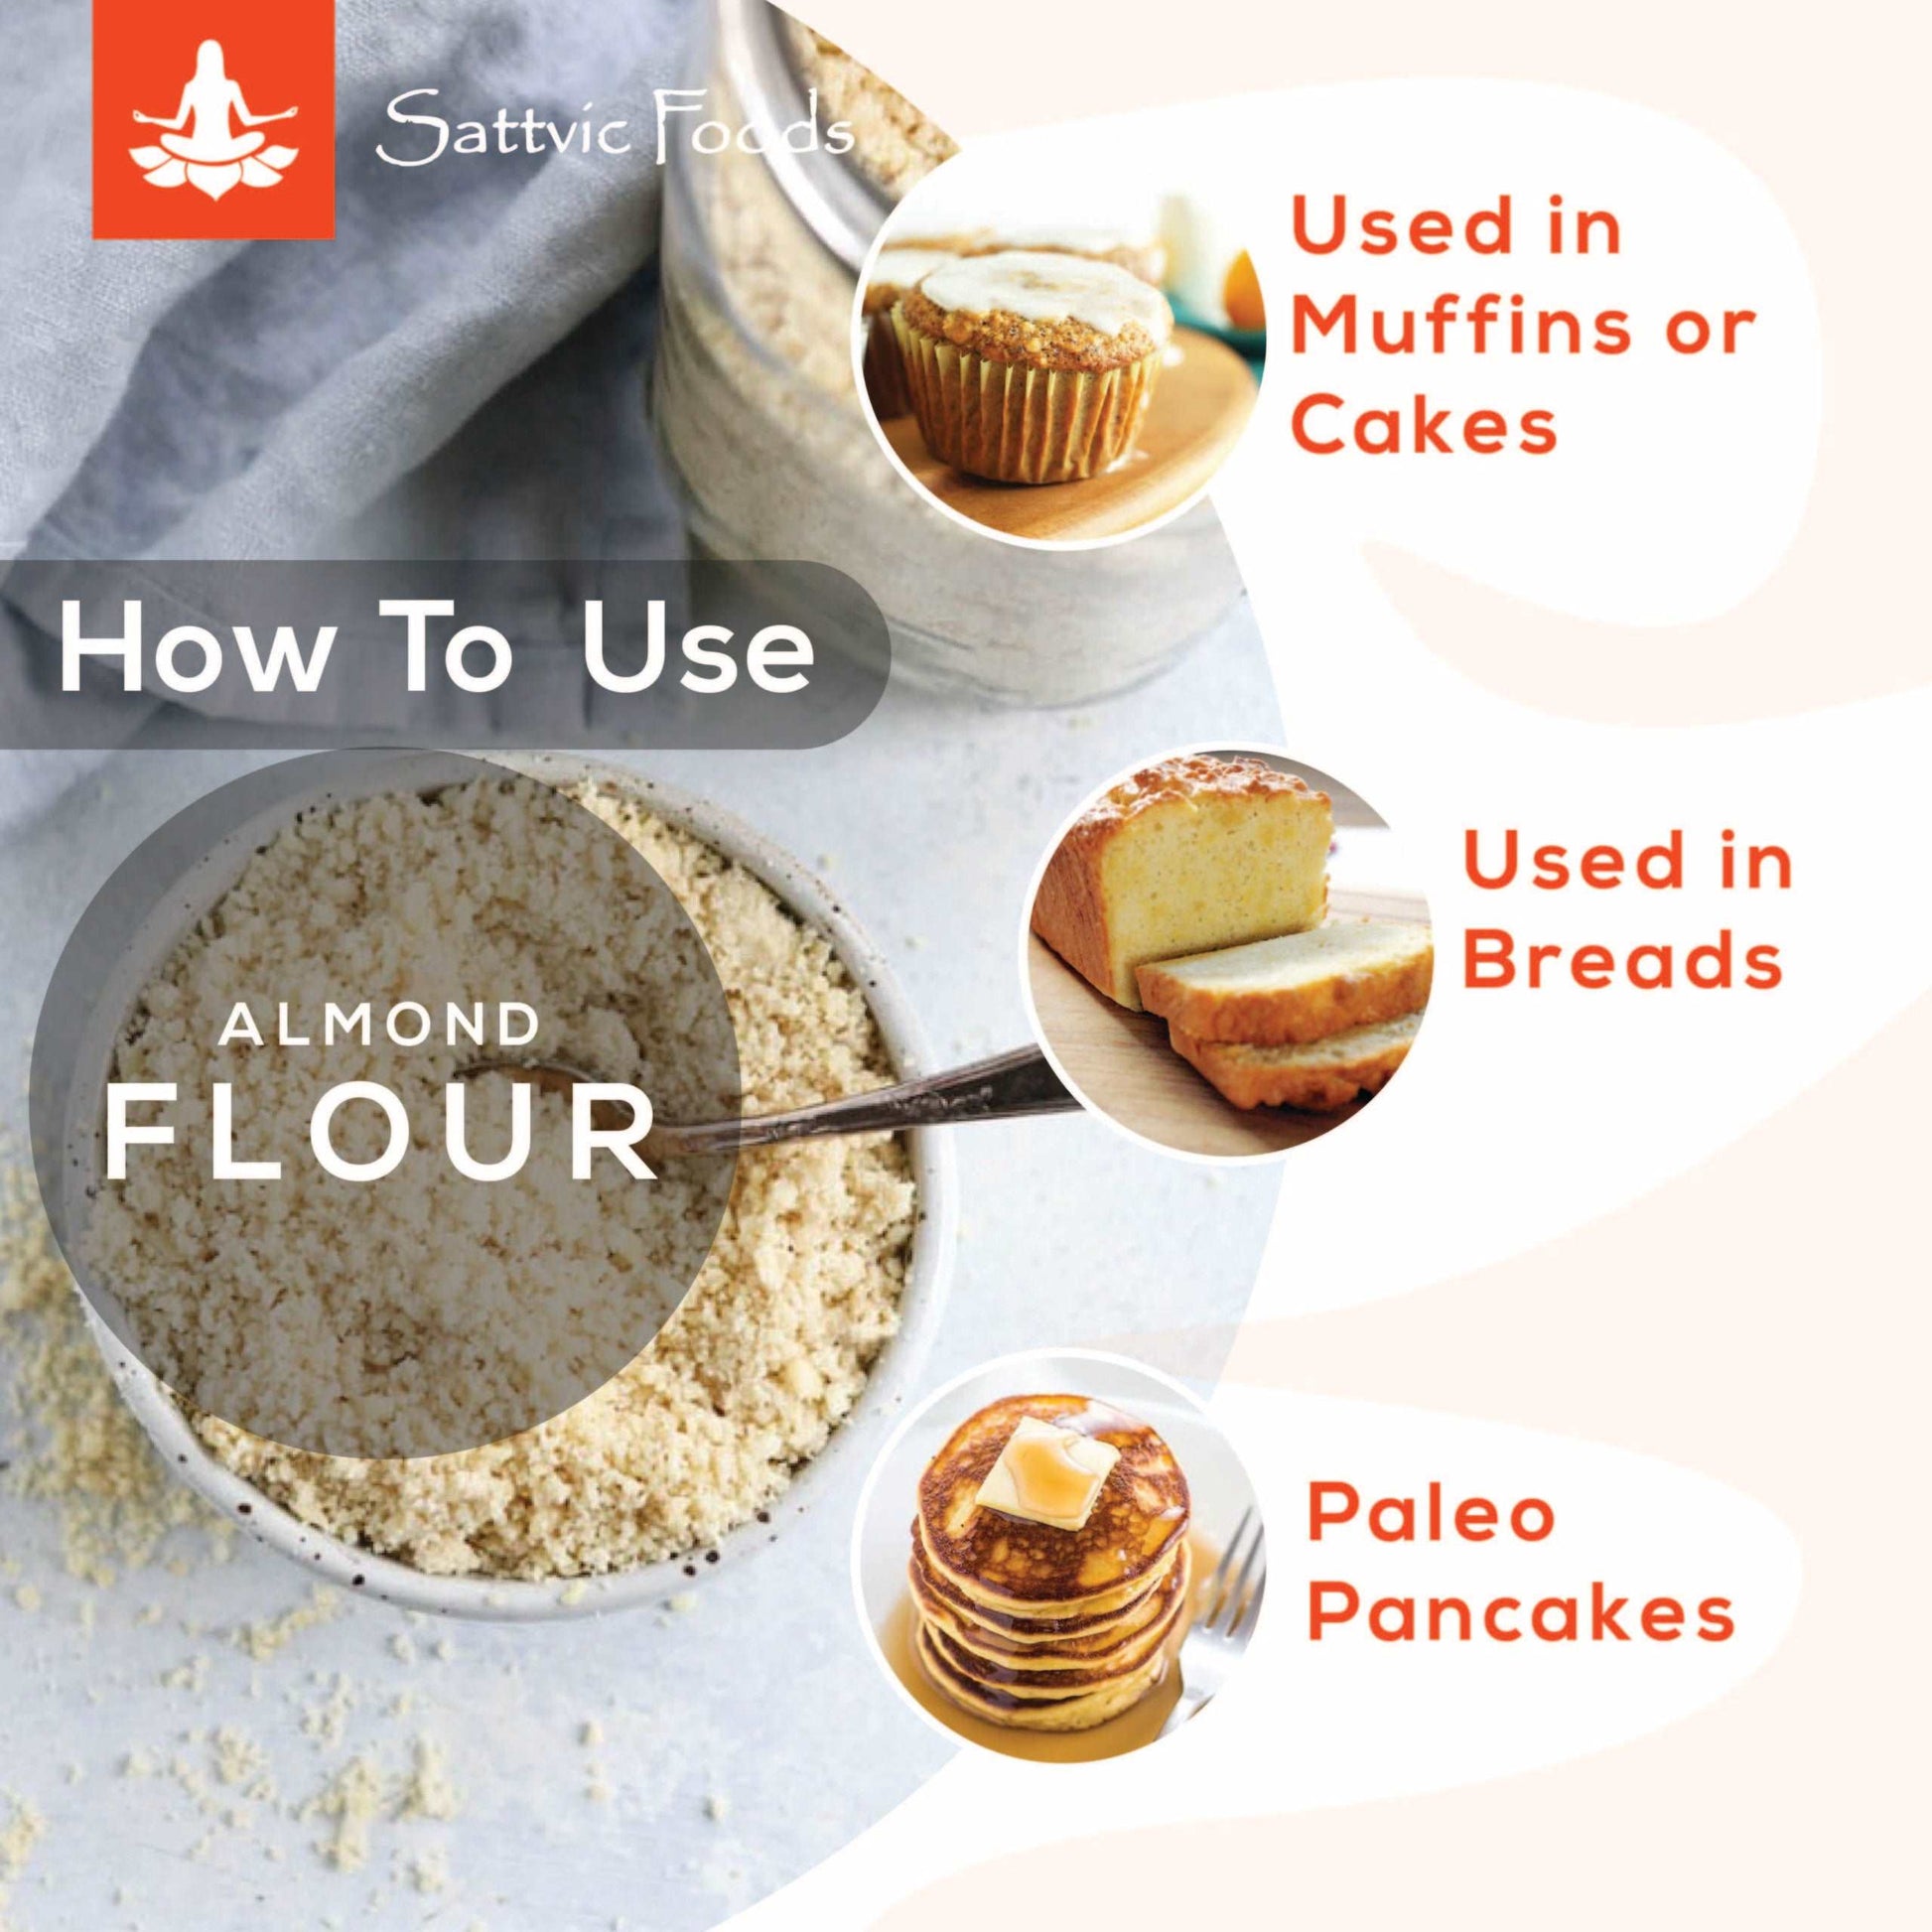 Unblanched Almond Flour Sattvic Foods